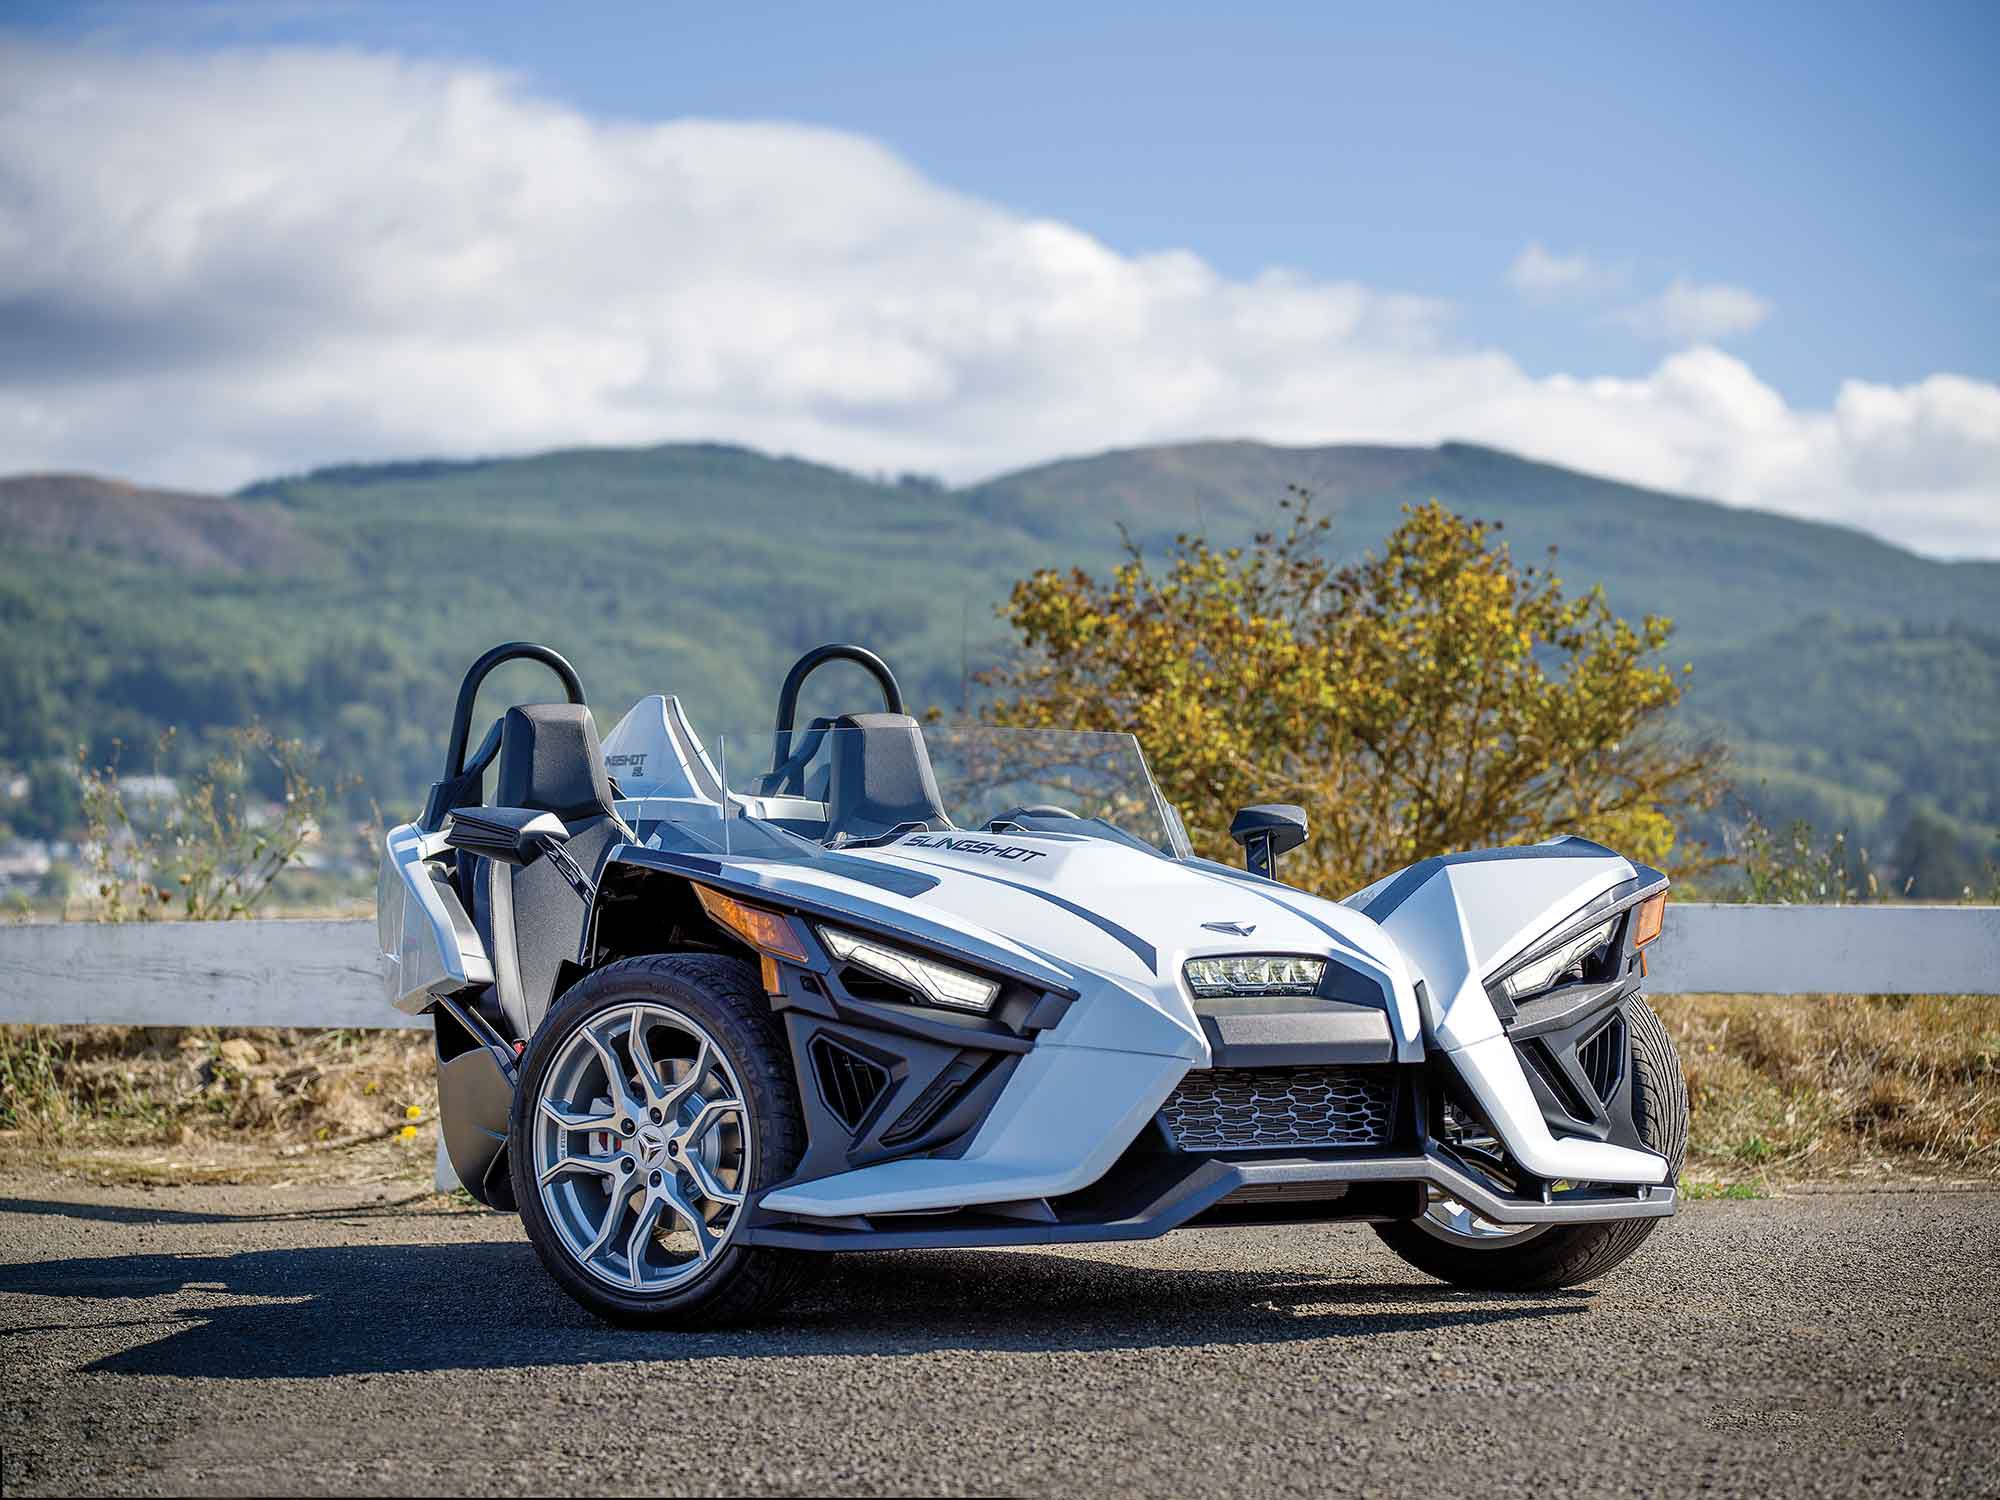 We return inside of the cockpit of Polaris’ wild-looking Slingshot SL autocycle in this review.